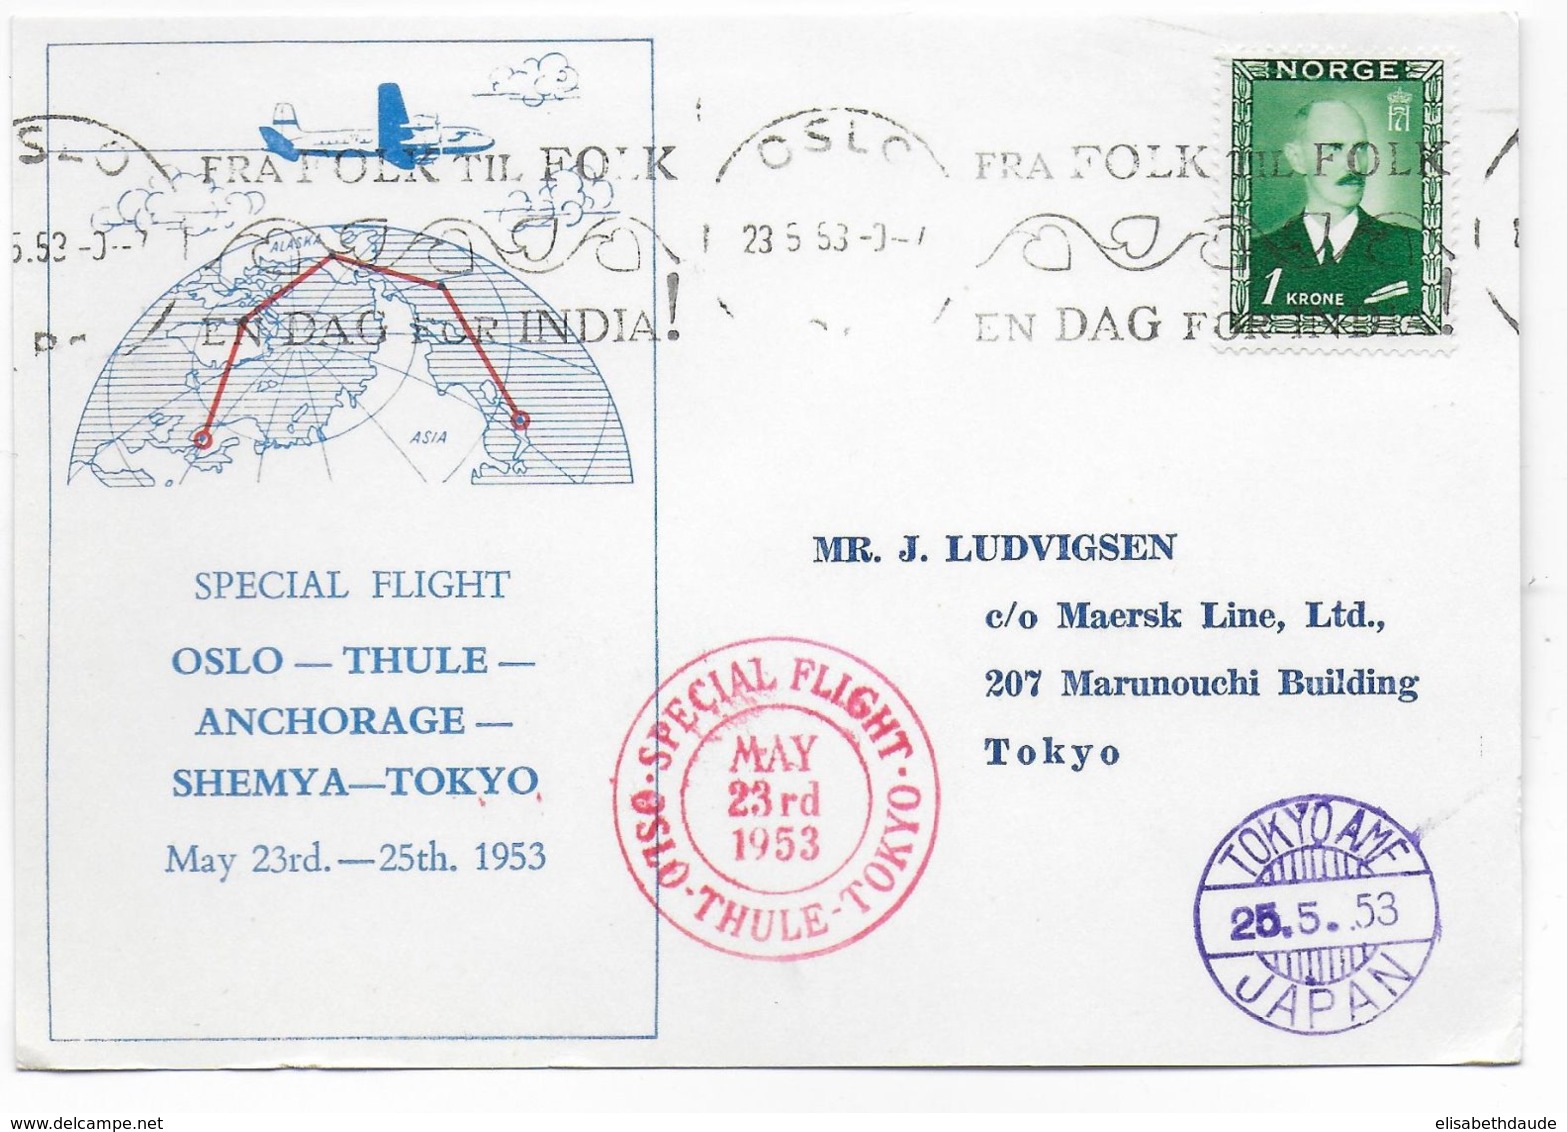 NORVEGE - 1953 - CARTE SPECIAL FLIGHT - VOL SPECIAL OSLO - THULE - ANCHORAGE - SHEMYA - TOKYO (JAPAN) - Covers & Documents